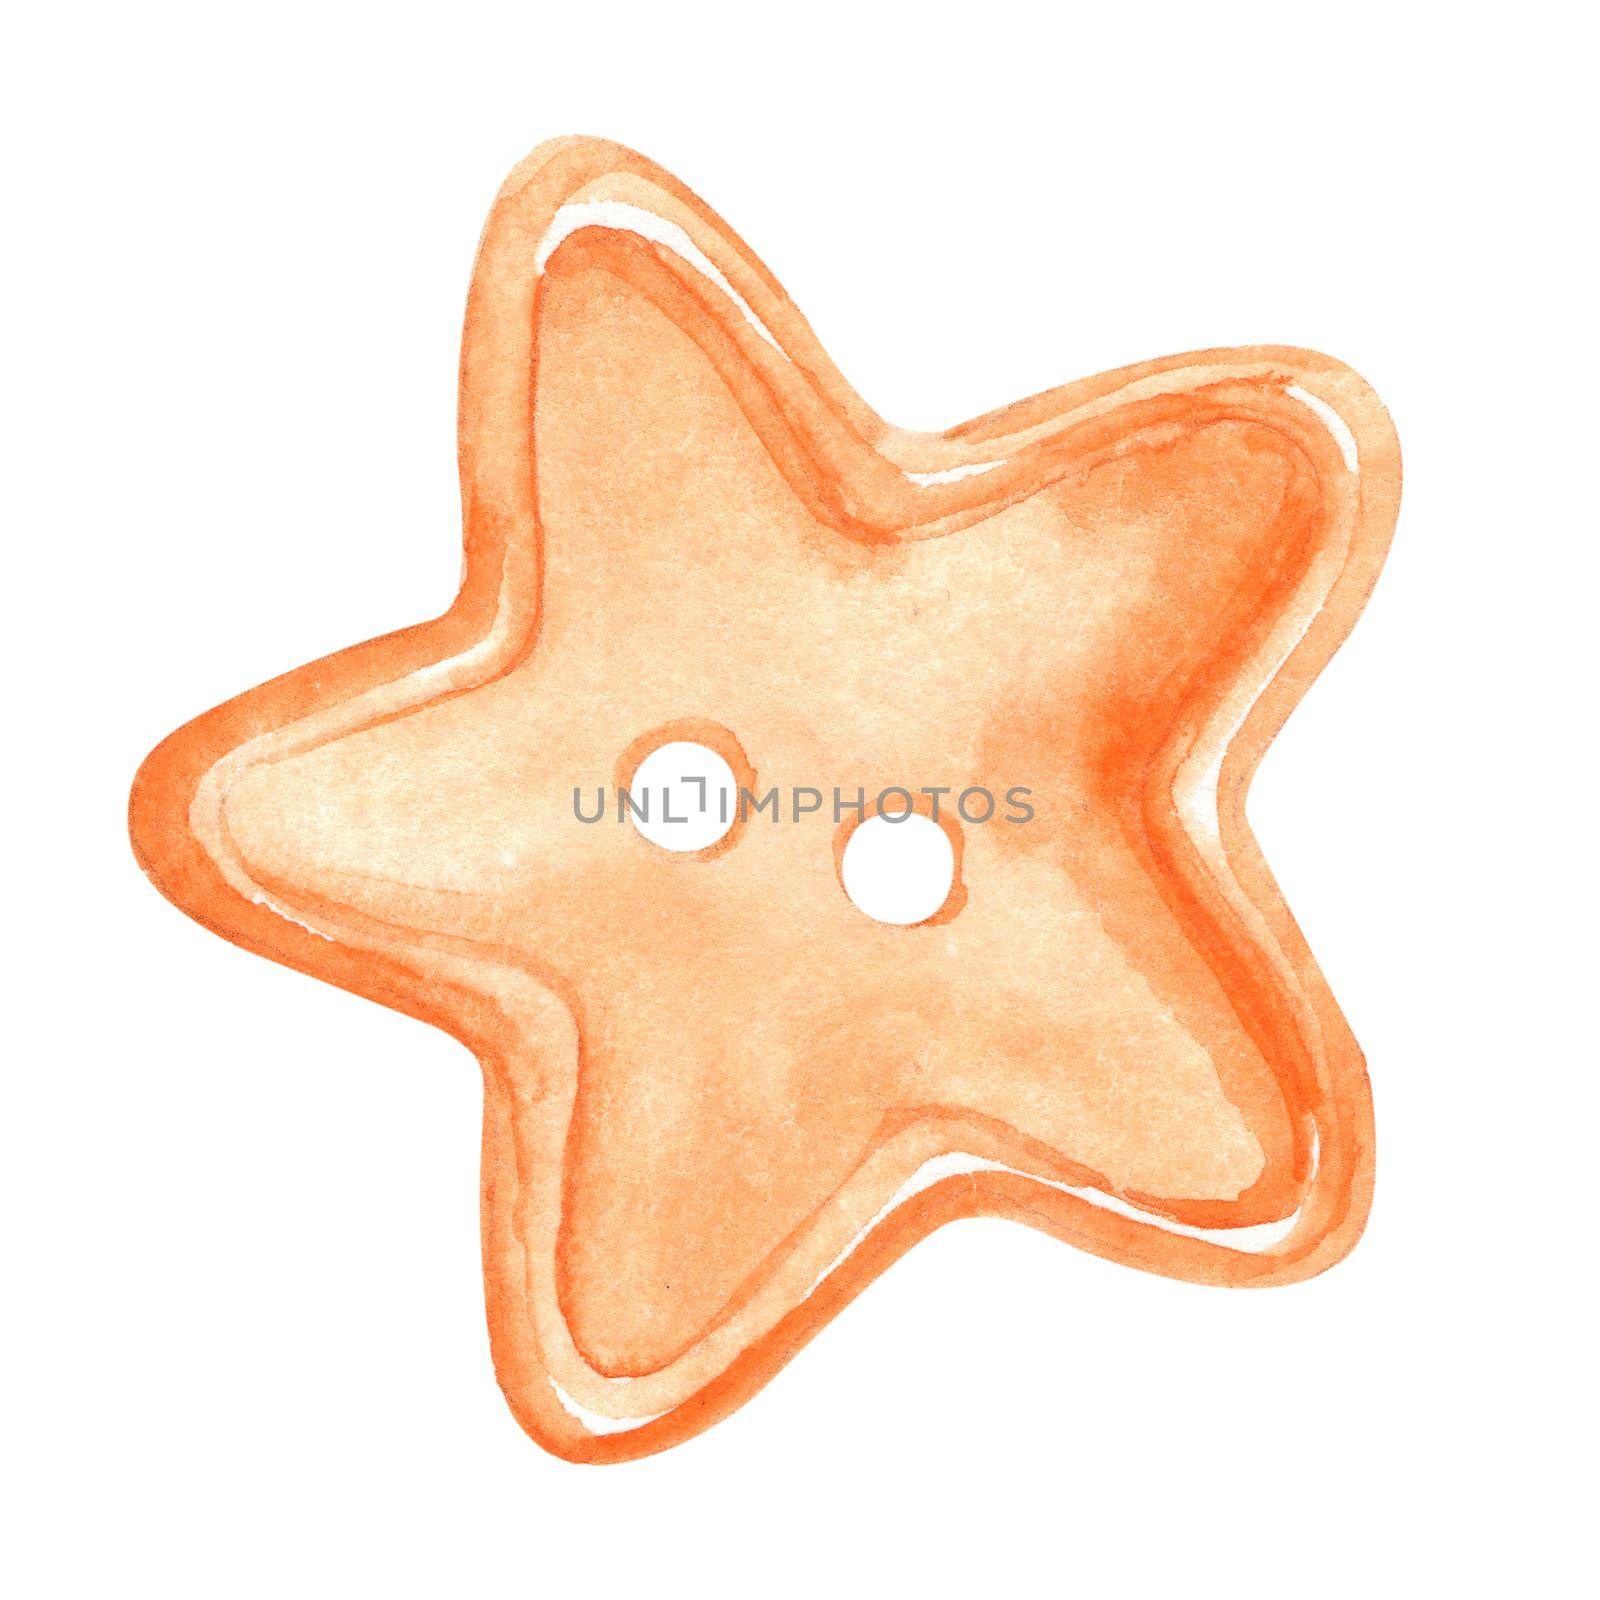 watercolor orange star button isolated on white background. Hand drawn sewing accessory